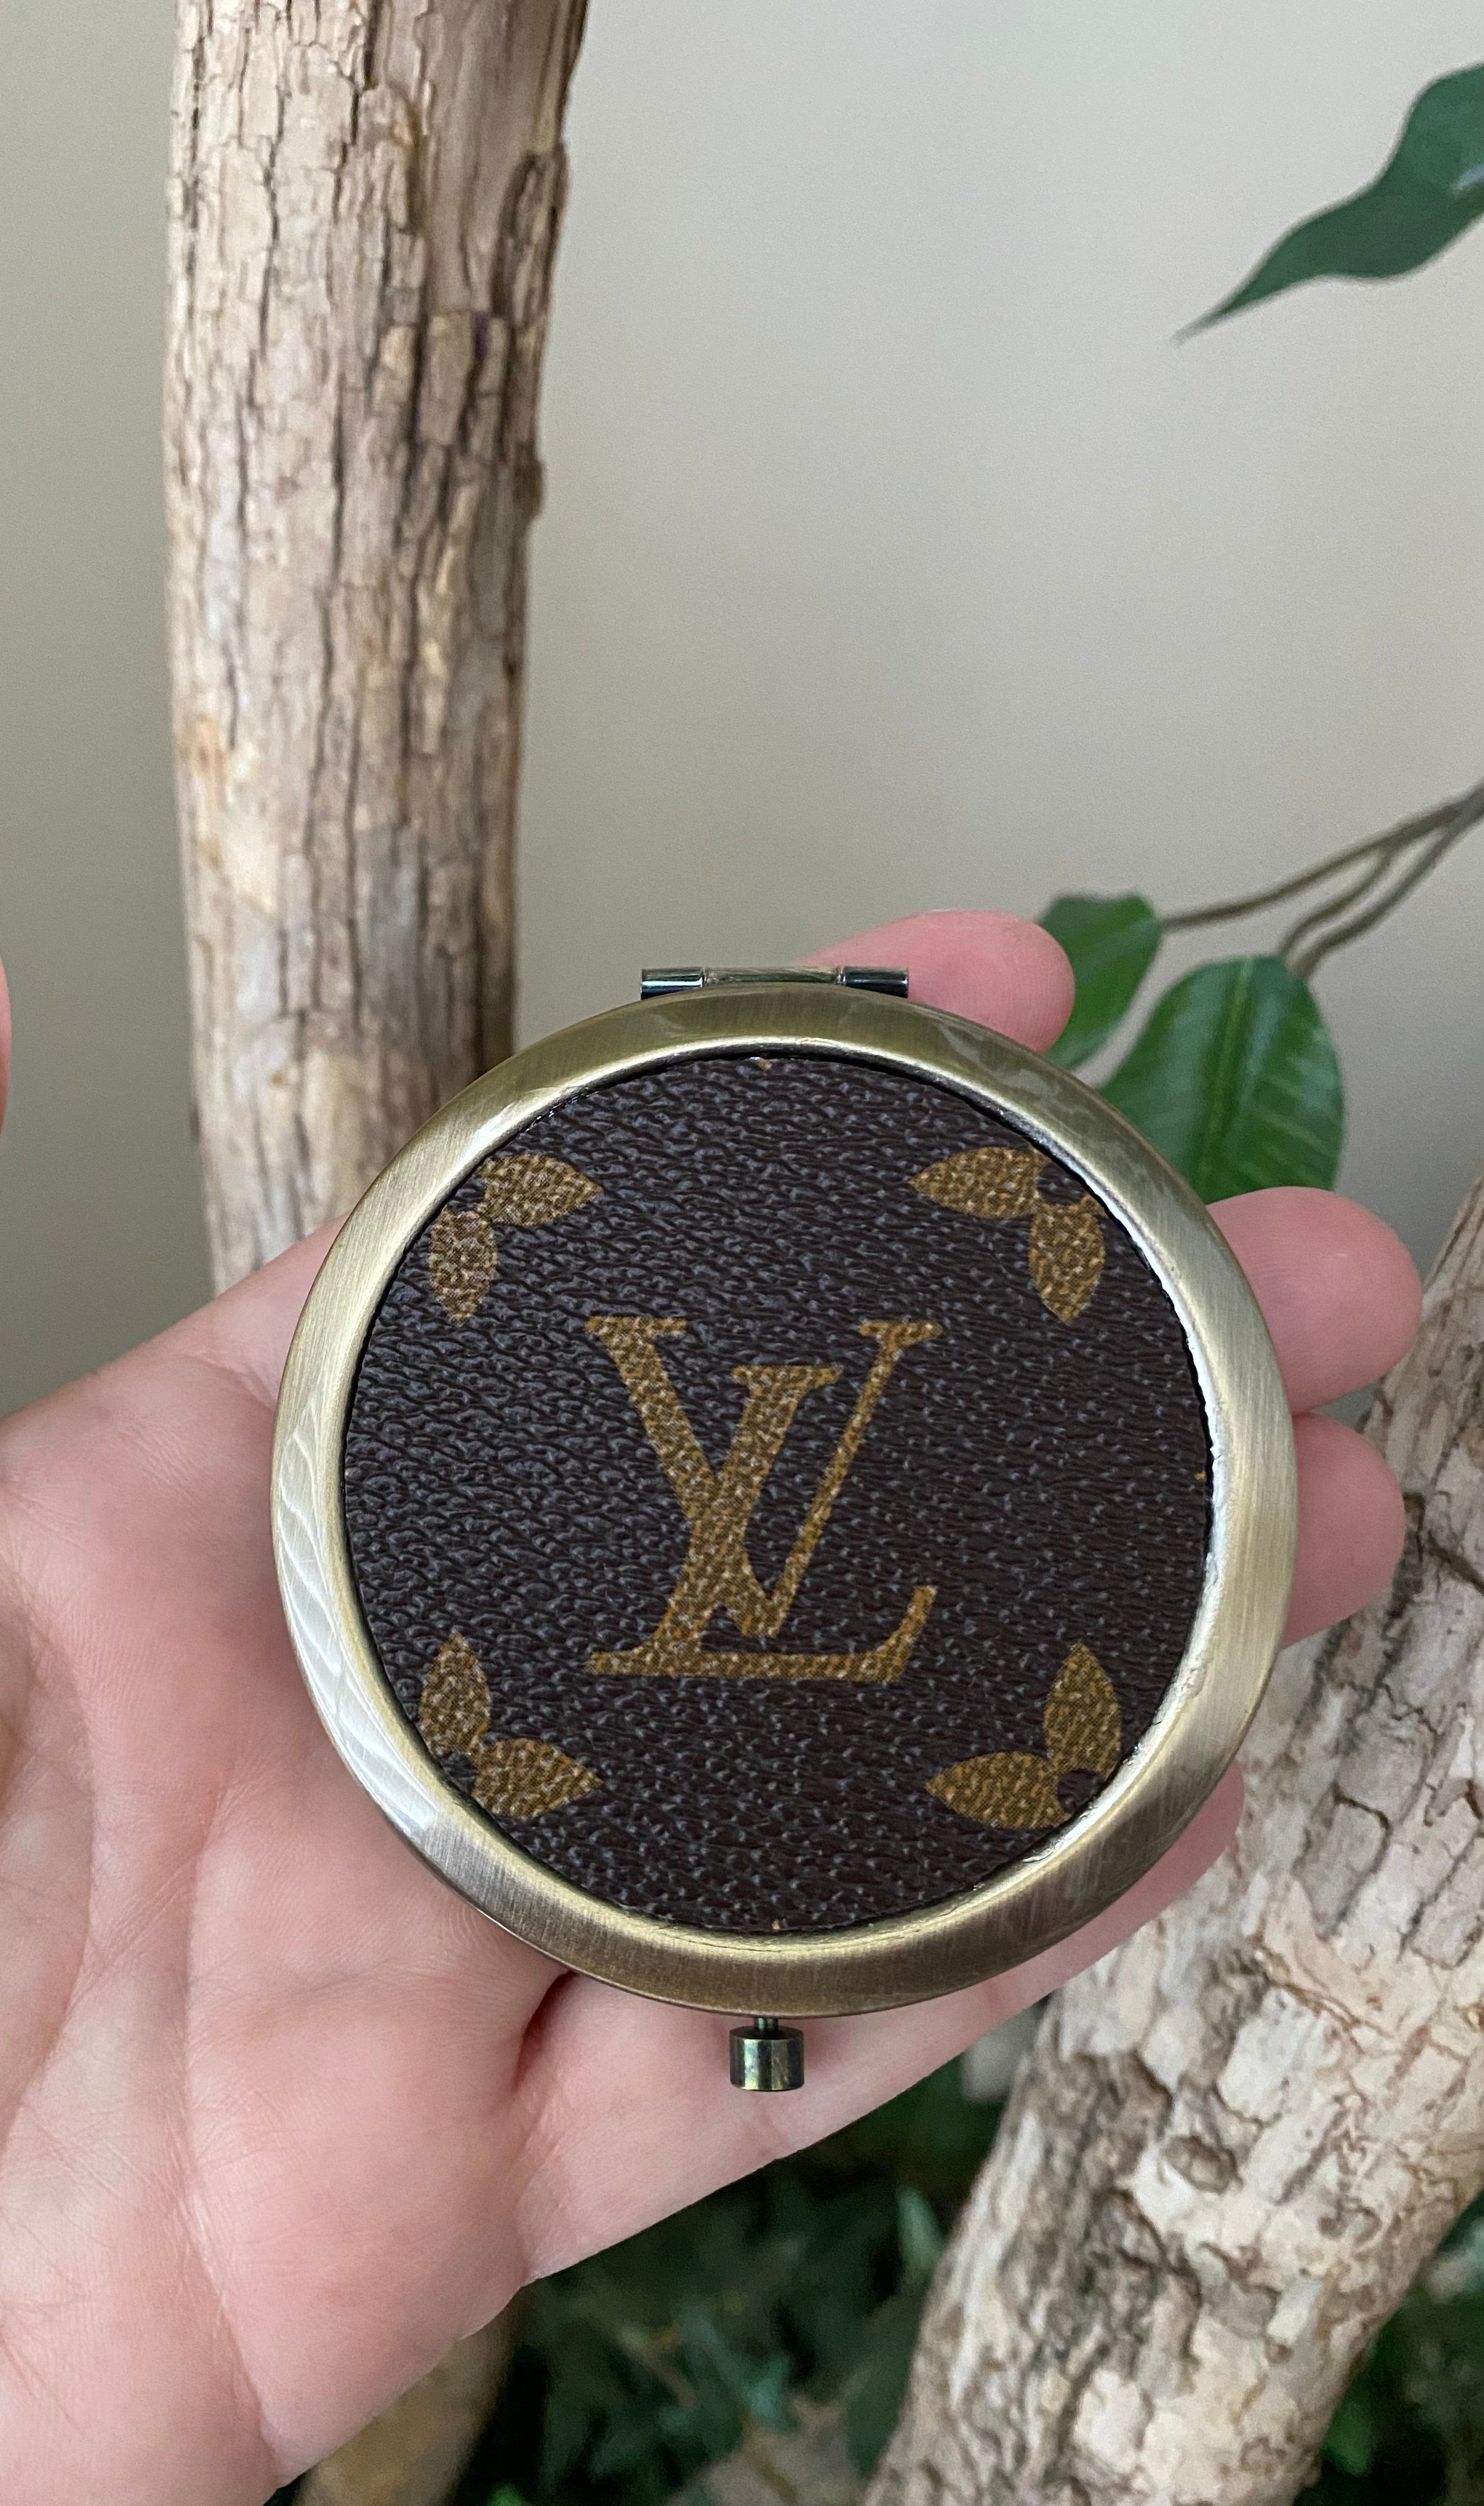 louis vuitton upcycled